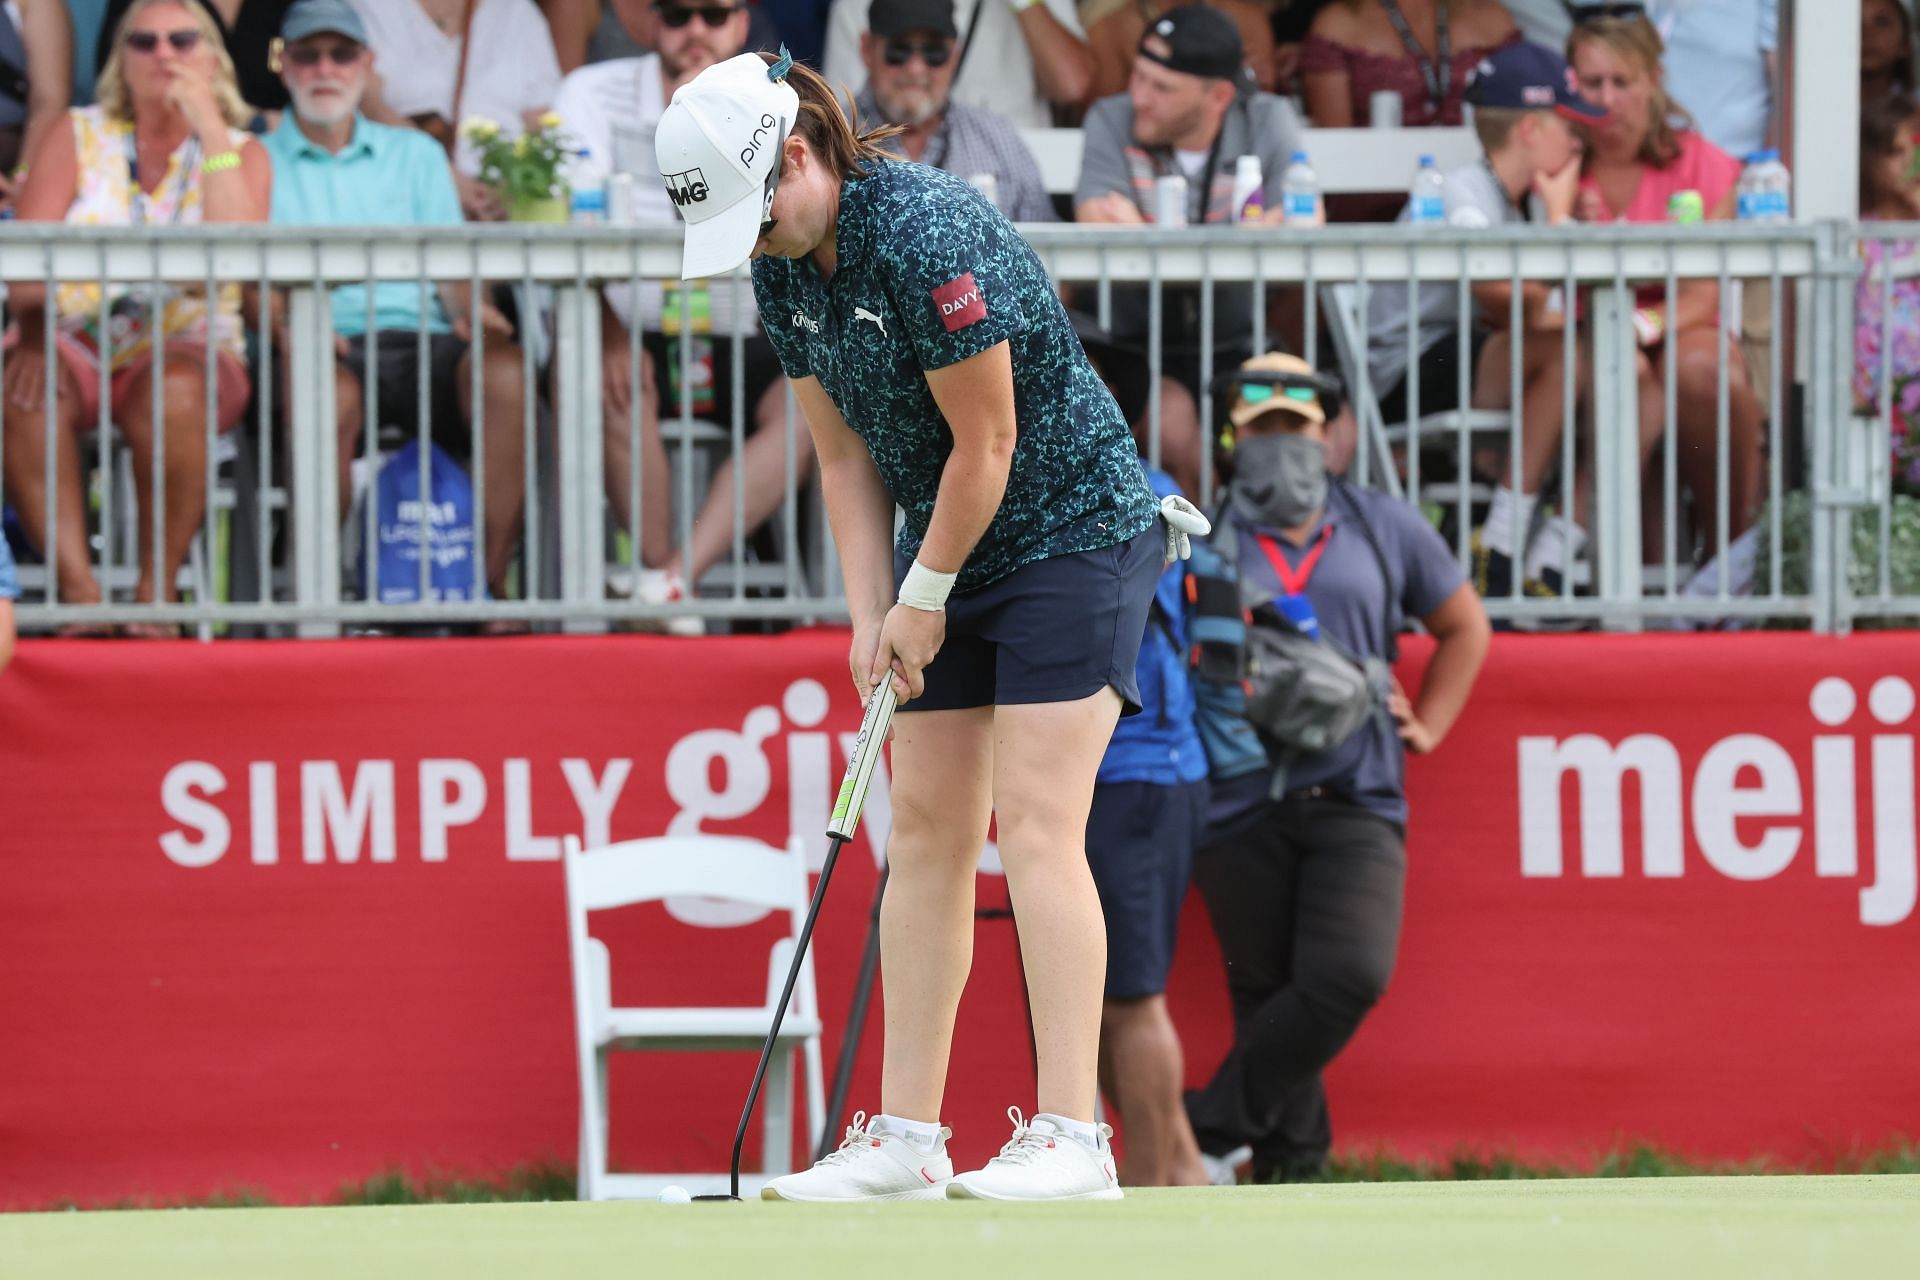 Meijer LPGA Classic Schedule, timings, top players, prize purse and more